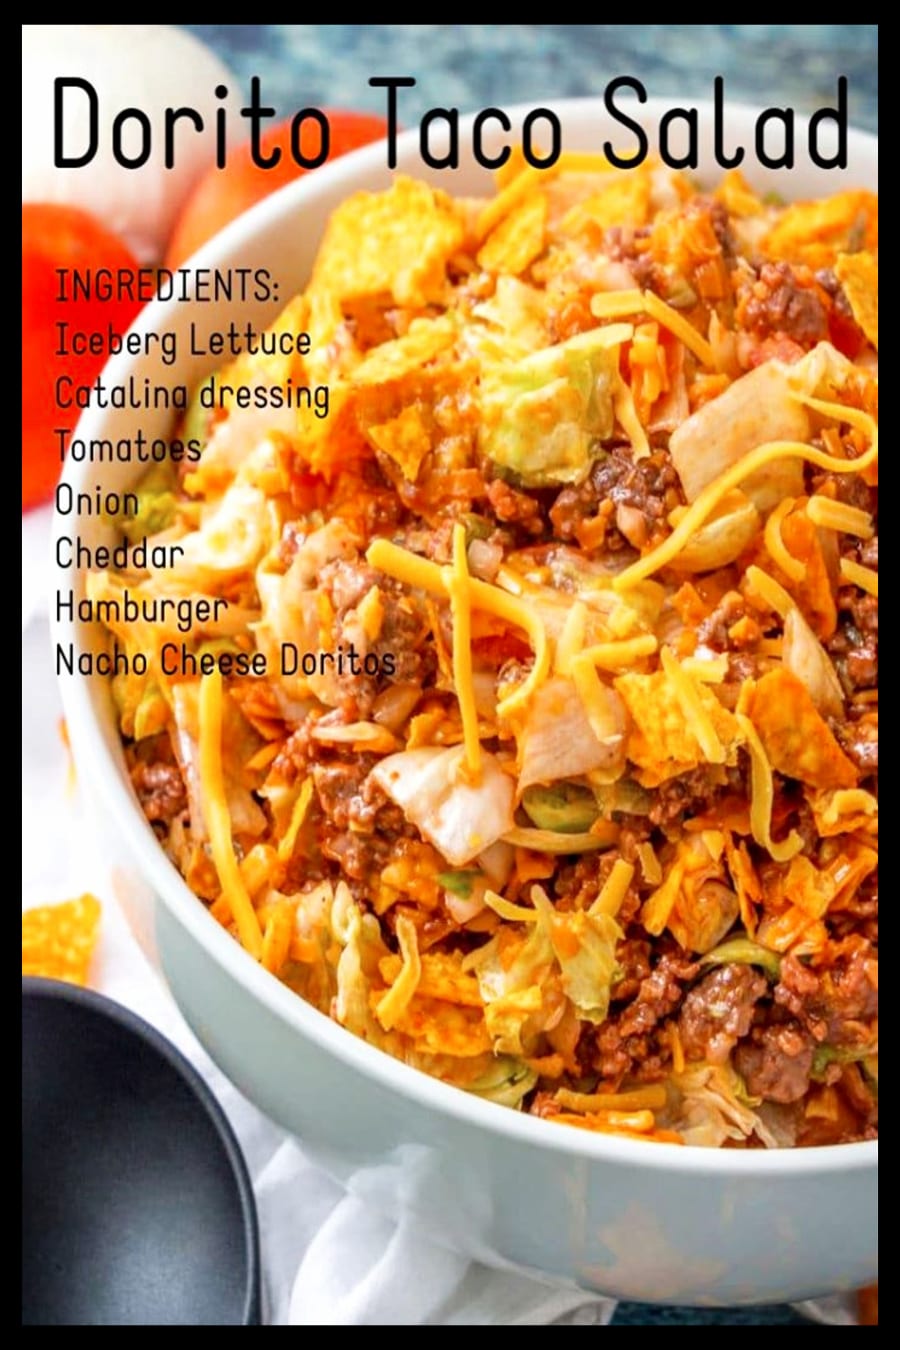 Easy family dinner ideas and recipes for TONIGHT!  This Dorito Taco salad is an easy meal for even picky eater kids.